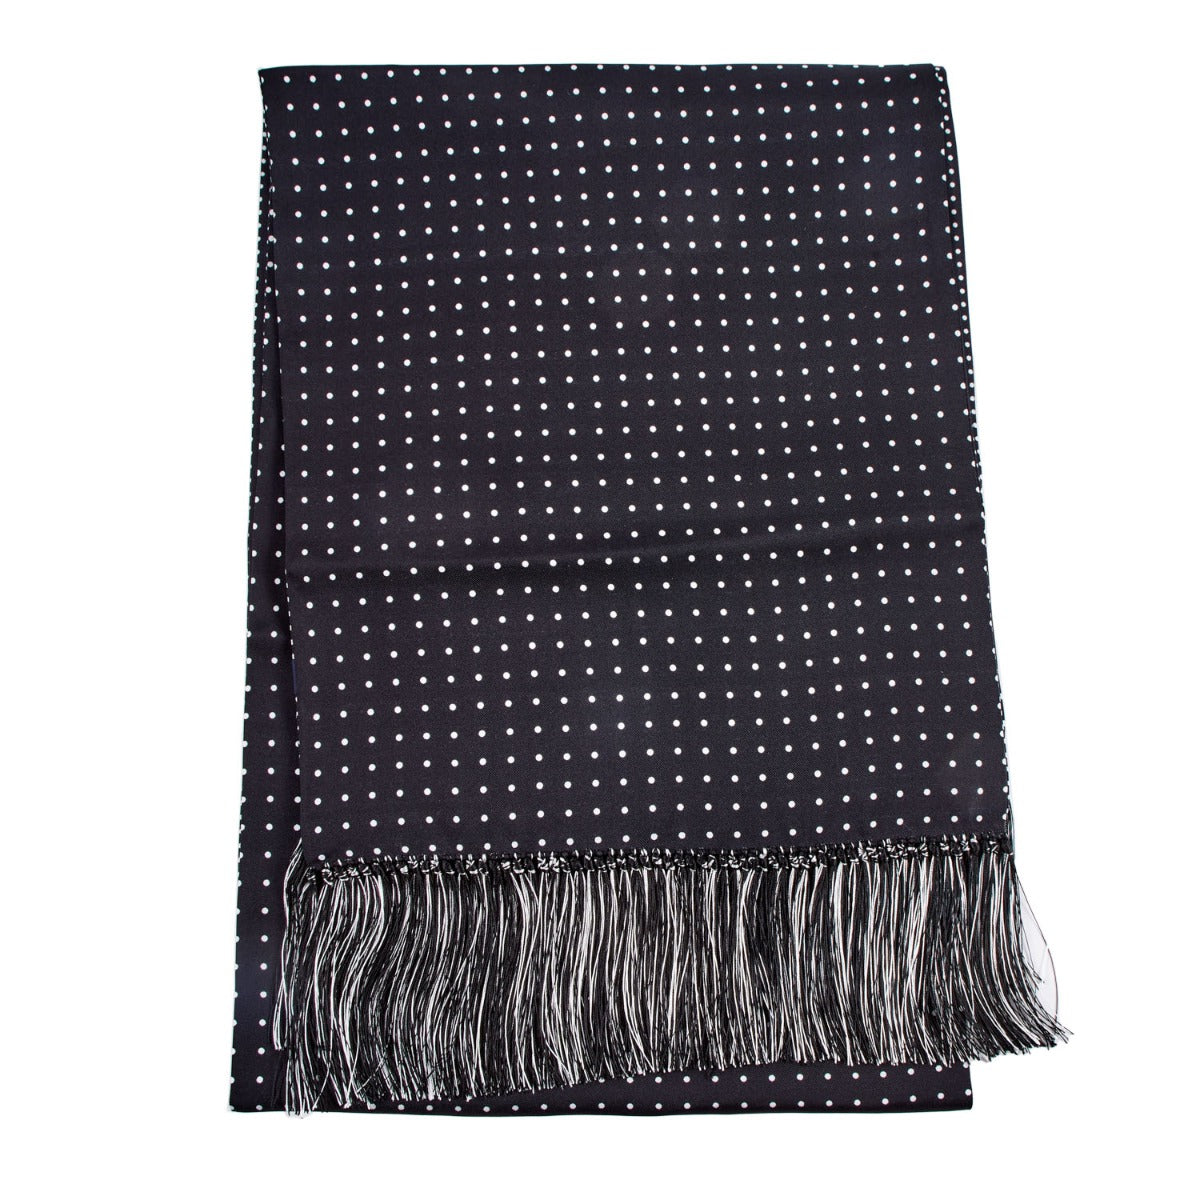 A Sovereign Grade Black London Dot 36oz Reversible Printed Silk Scarf with fringes, perfect for winter, from KirbyAllison.com.